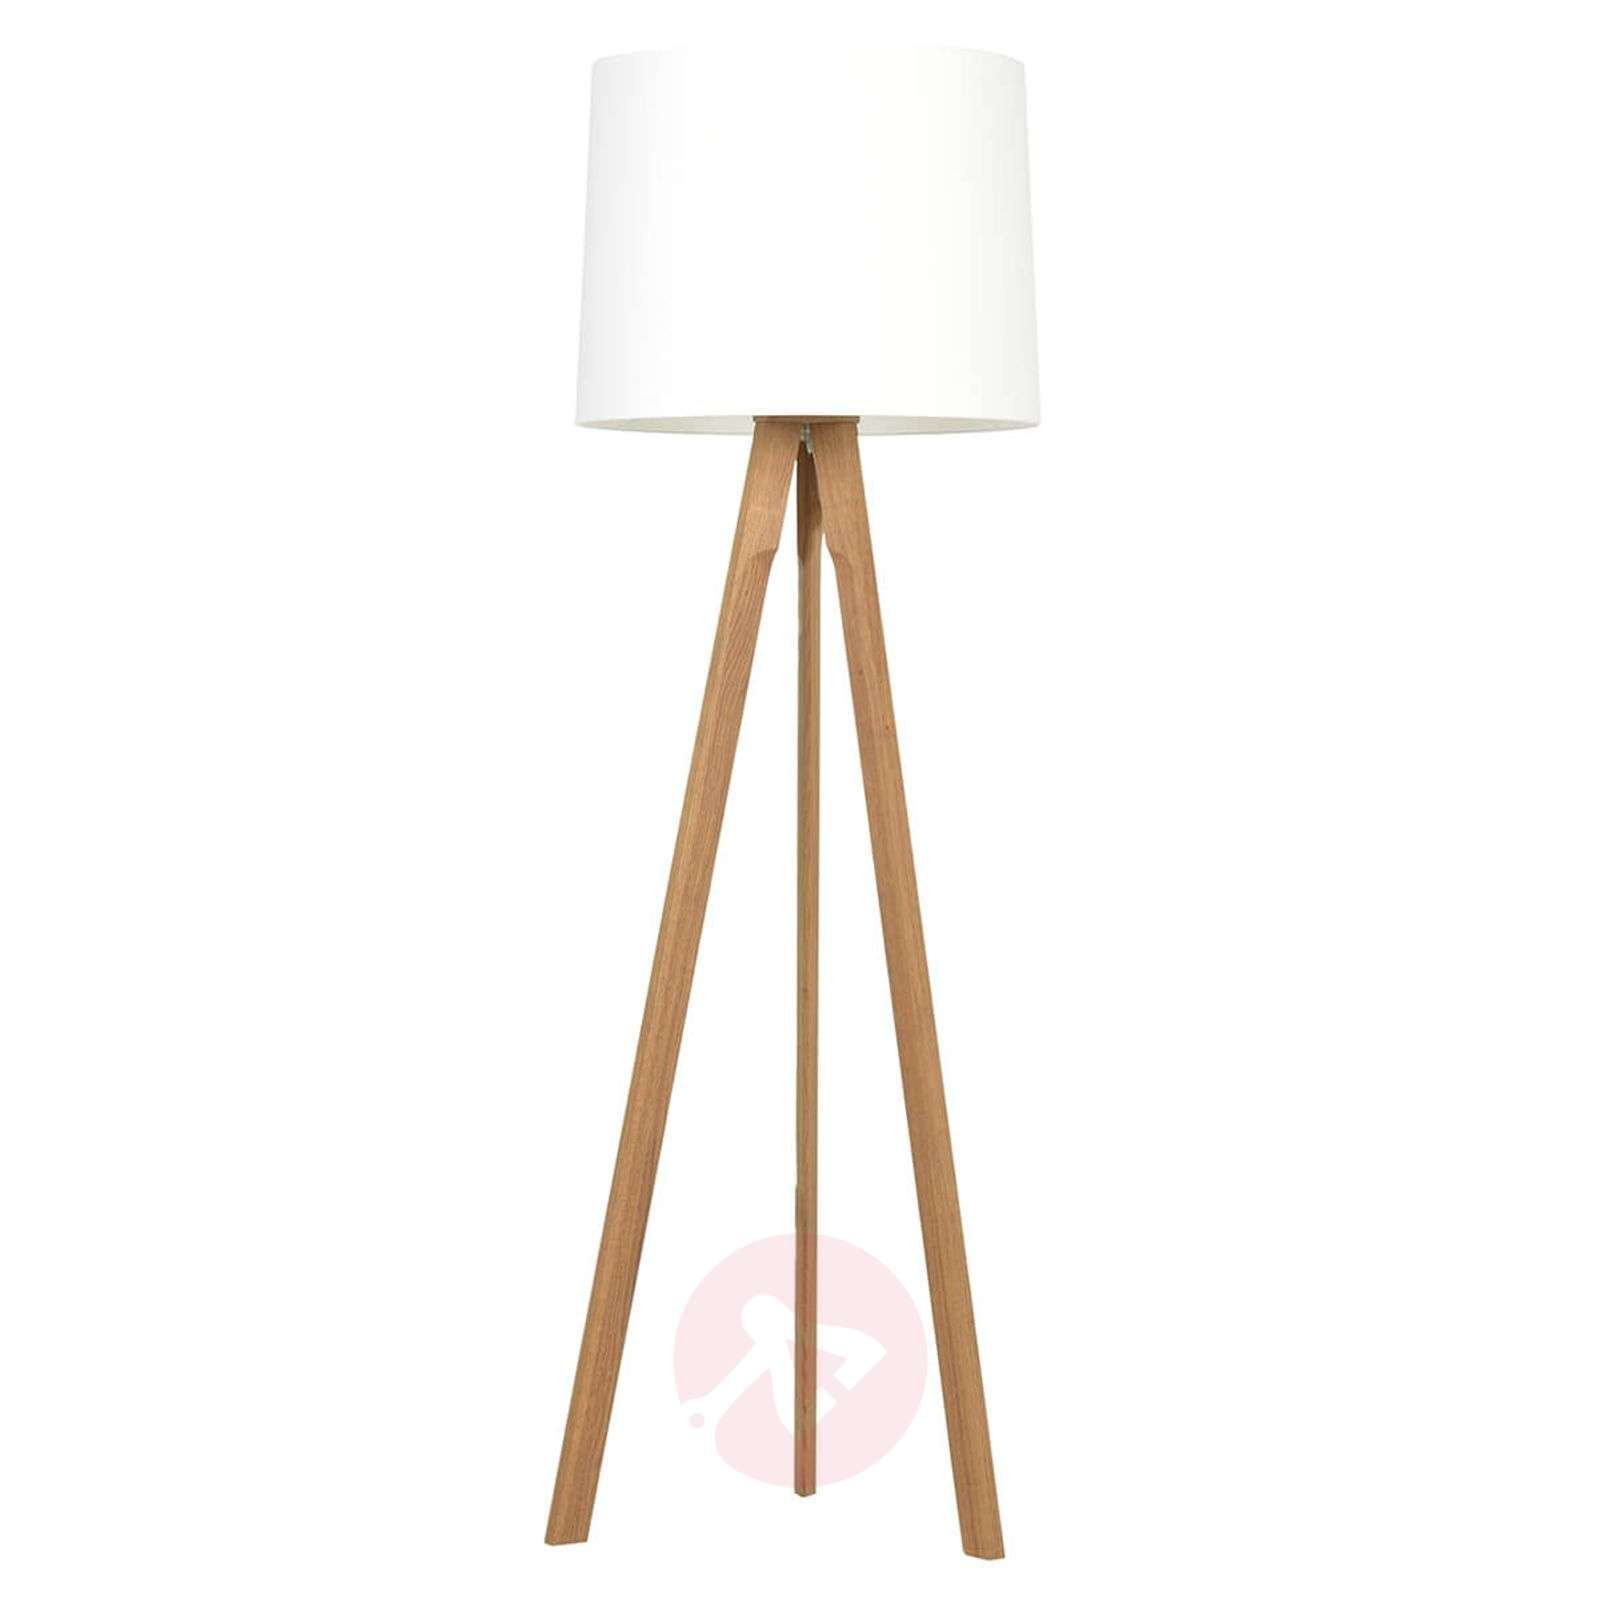 Tripod Floor Lamp Tre Made Of Solid Wood Lightscouk throughout sizing 1600 X 1600